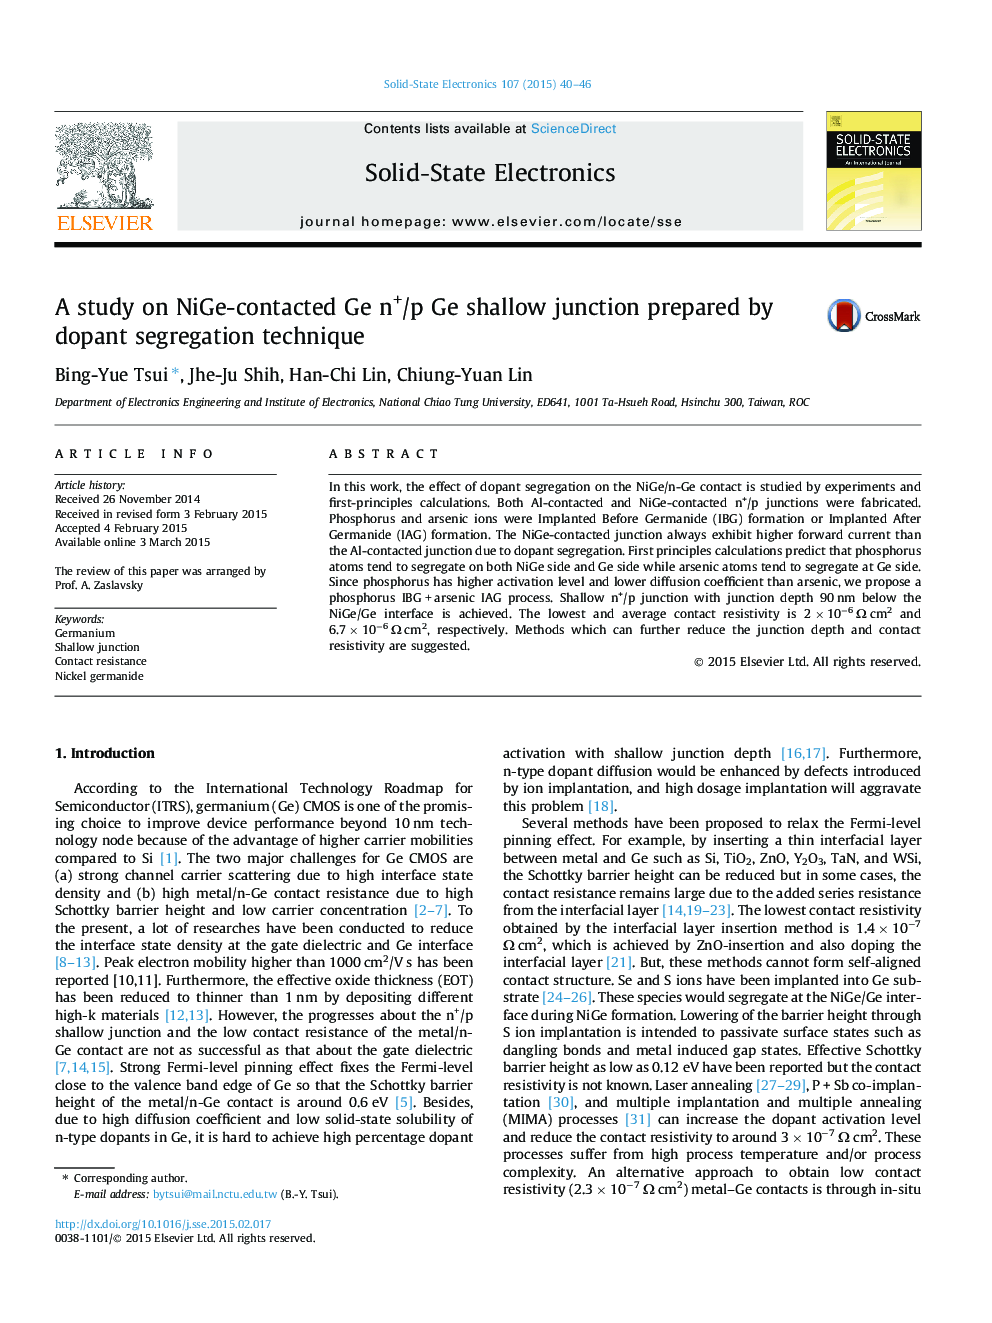 A study on NiGe-contacted Ge n+/p Ge shallow junction prepared by dopant segregation technique